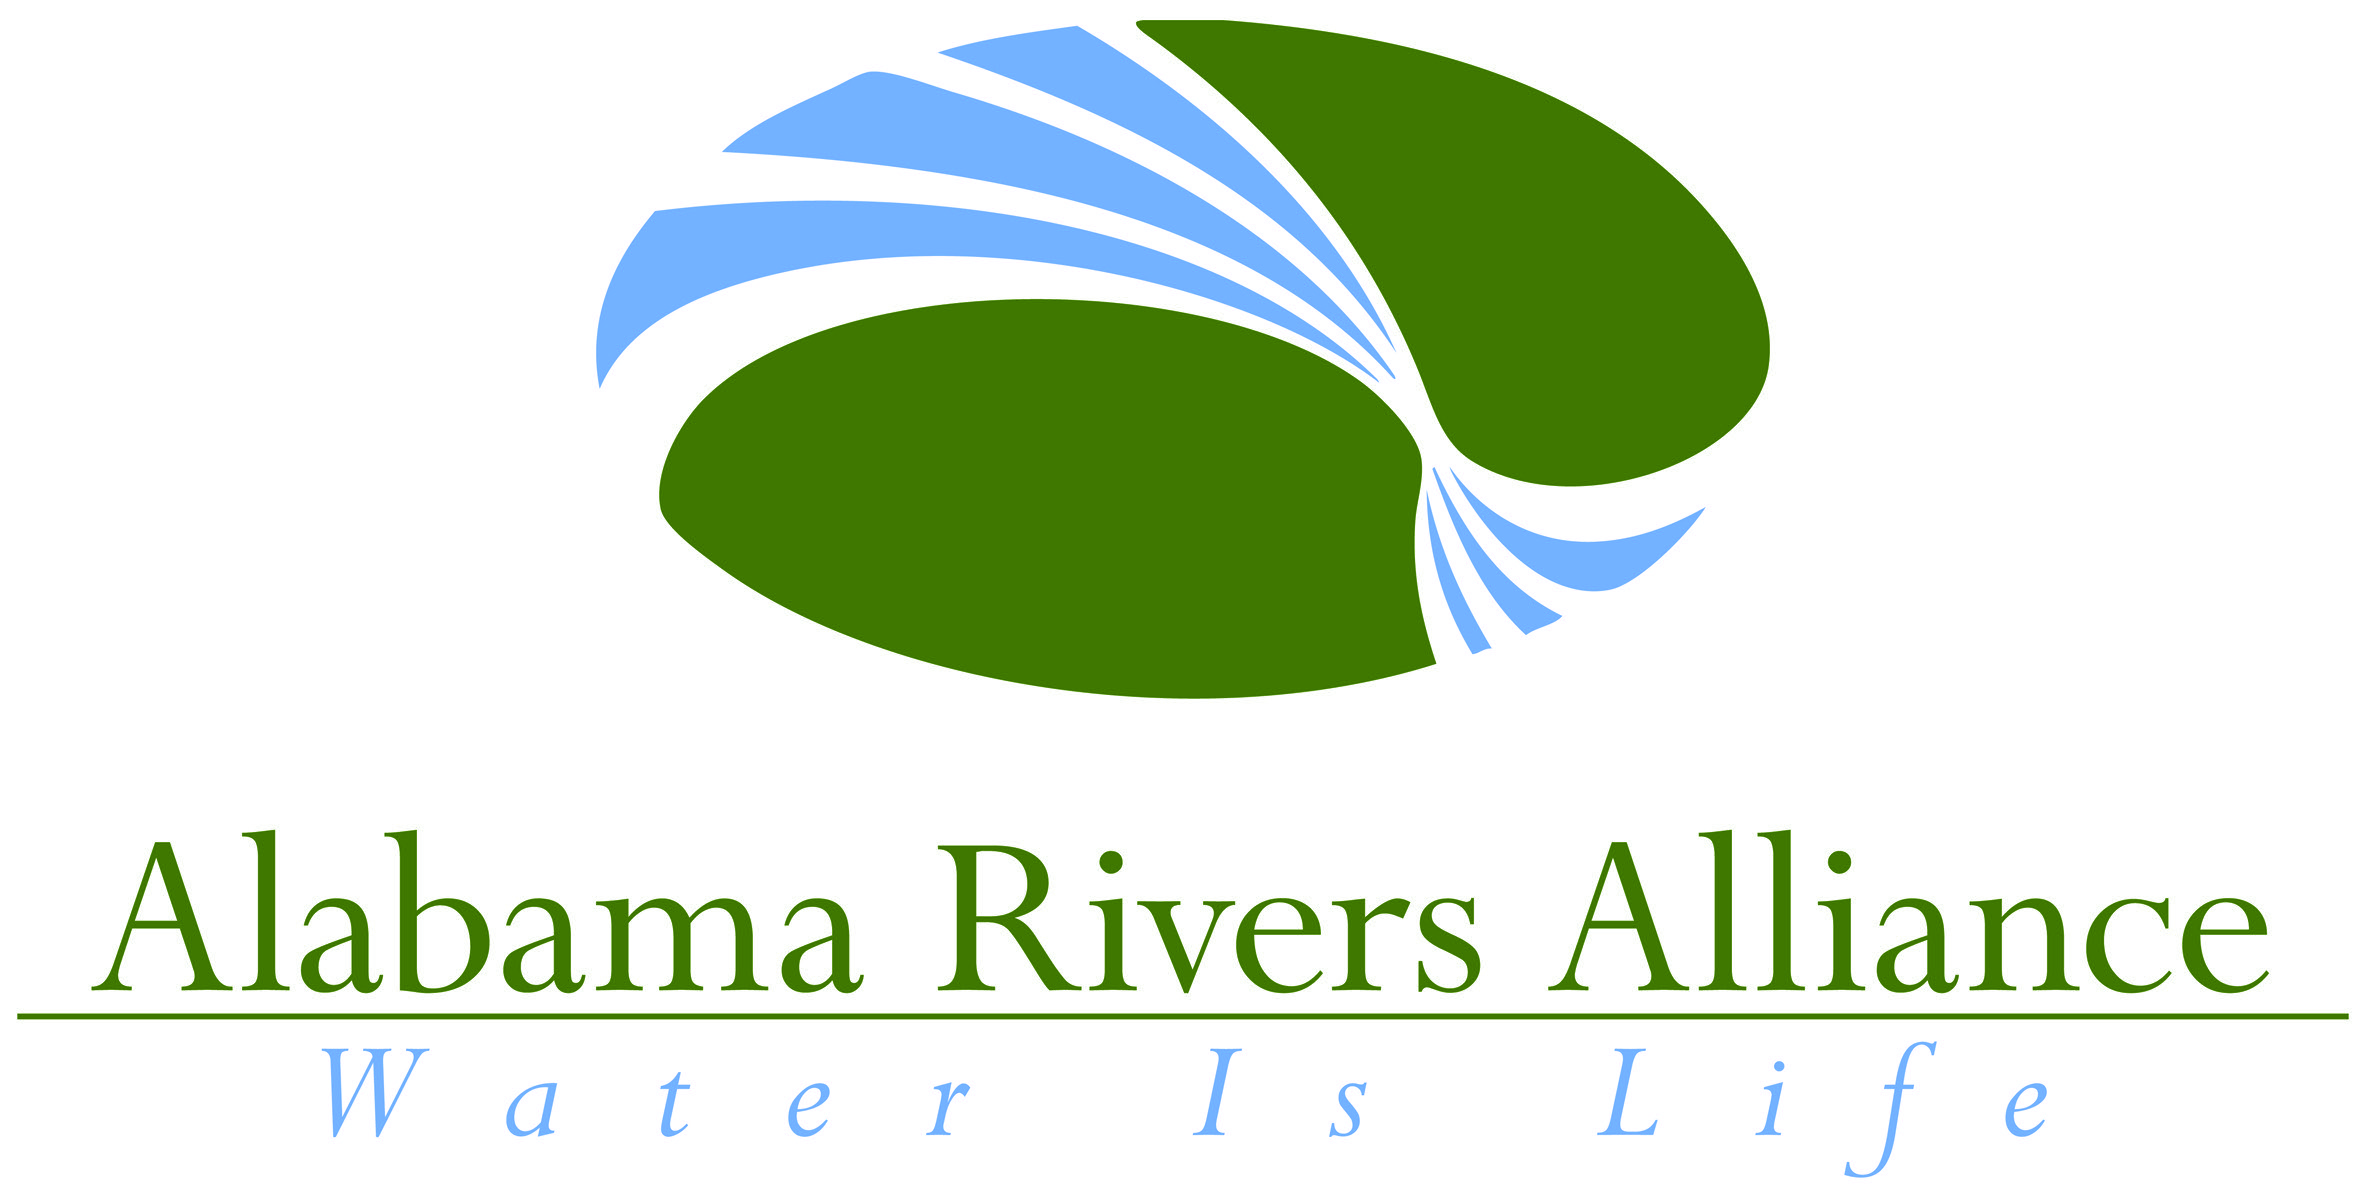 Alabama Rivers Alliance: Water is Life